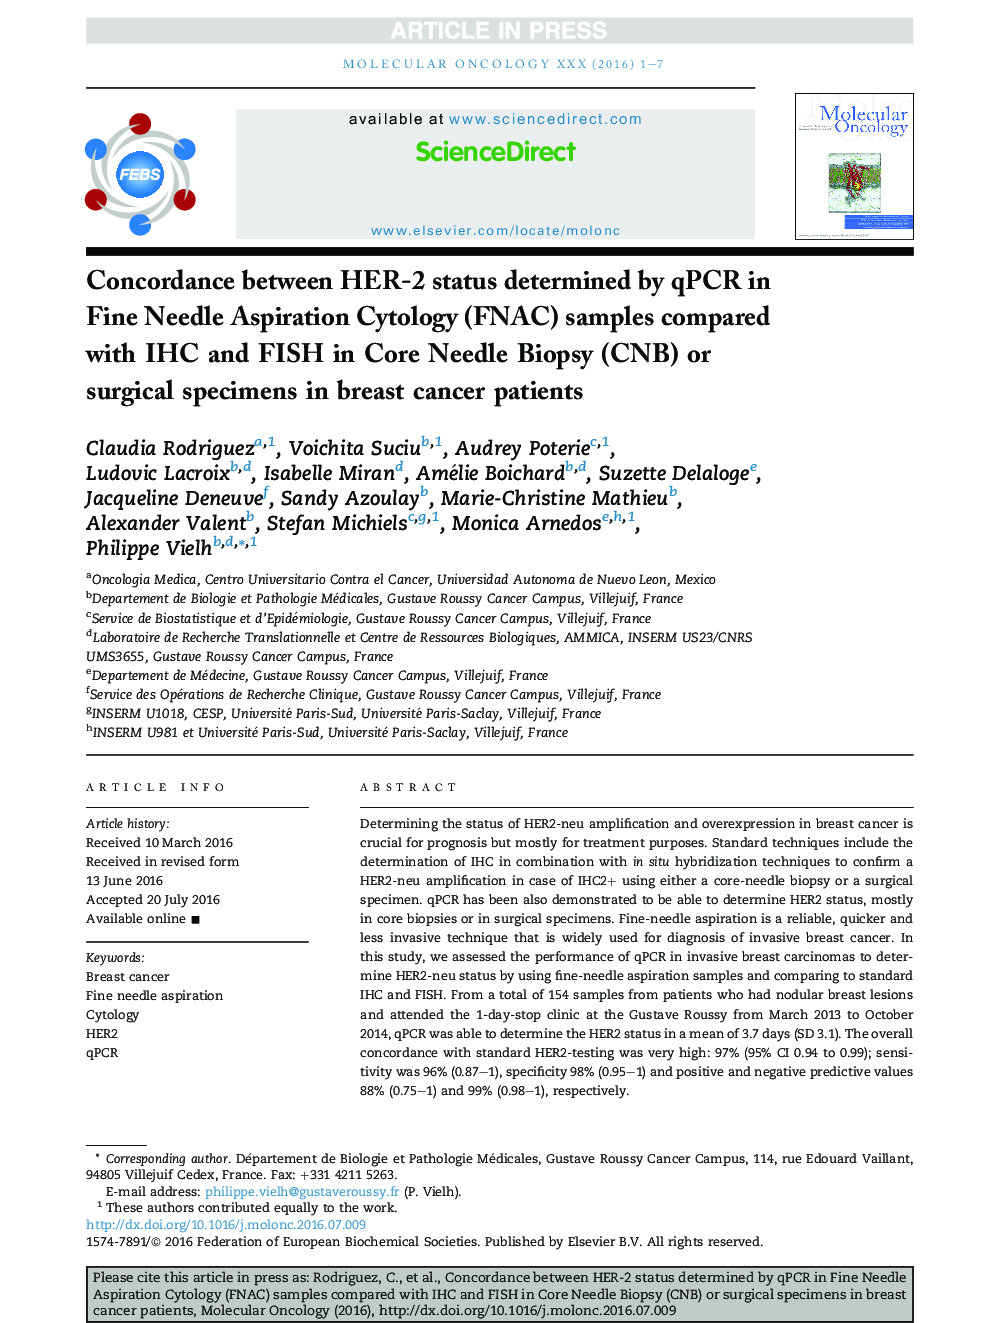 Concordance between HER-2 status determined by qPCR in Fine Needle Aspiration Cytology (FNAC) samples compared with IHC and FISH in Core Needle Biopsy (CNB) or surgical specimens in breast cancer patients